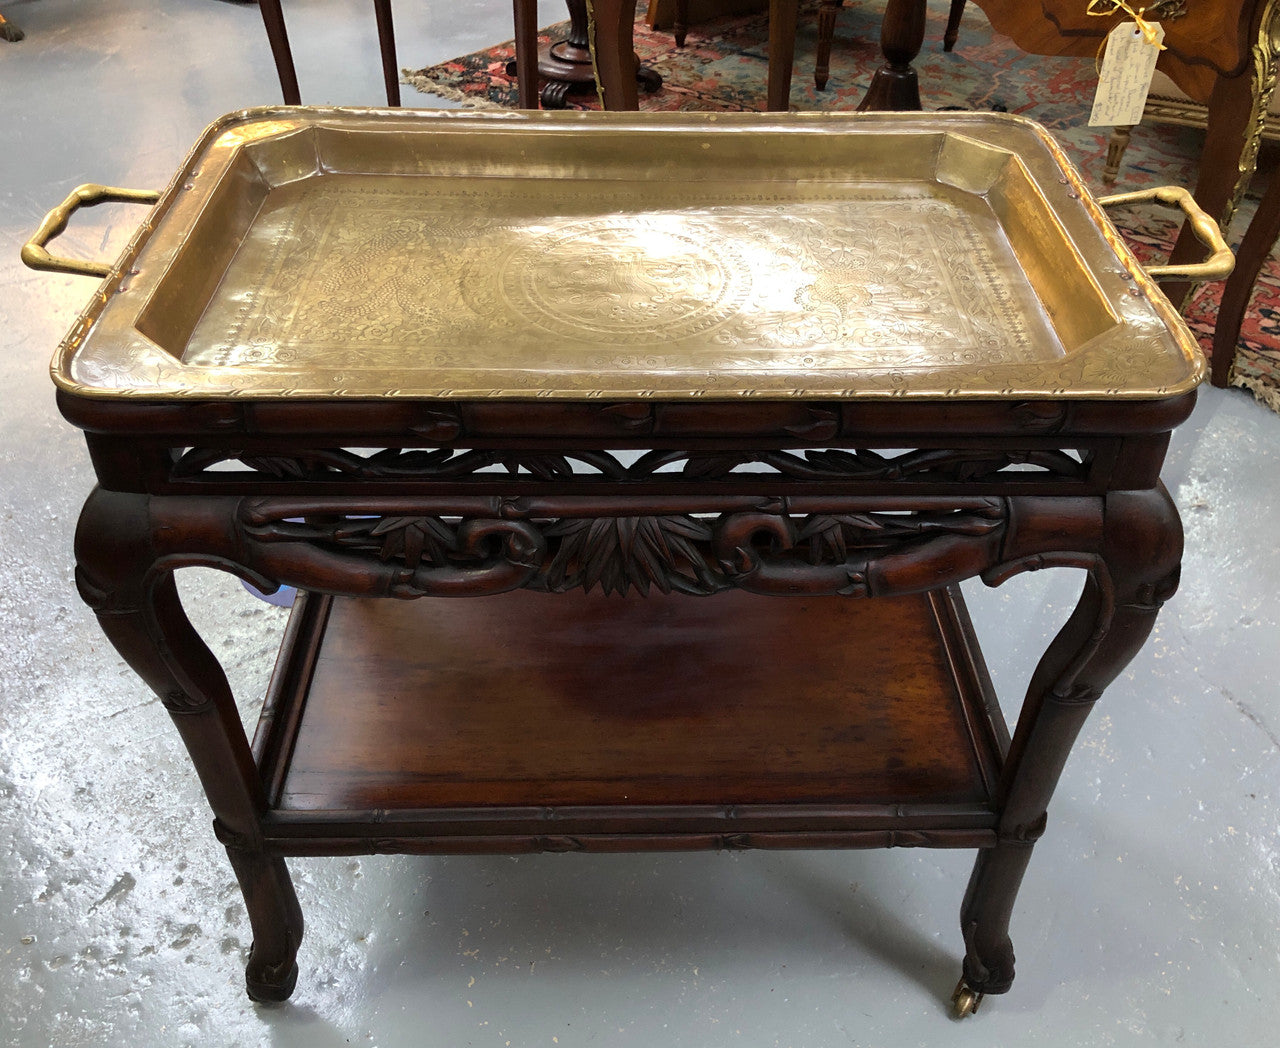 Victorian Rosewood auto/drinks trolley with a very decorative removable brass tray. In very good original detail condition.